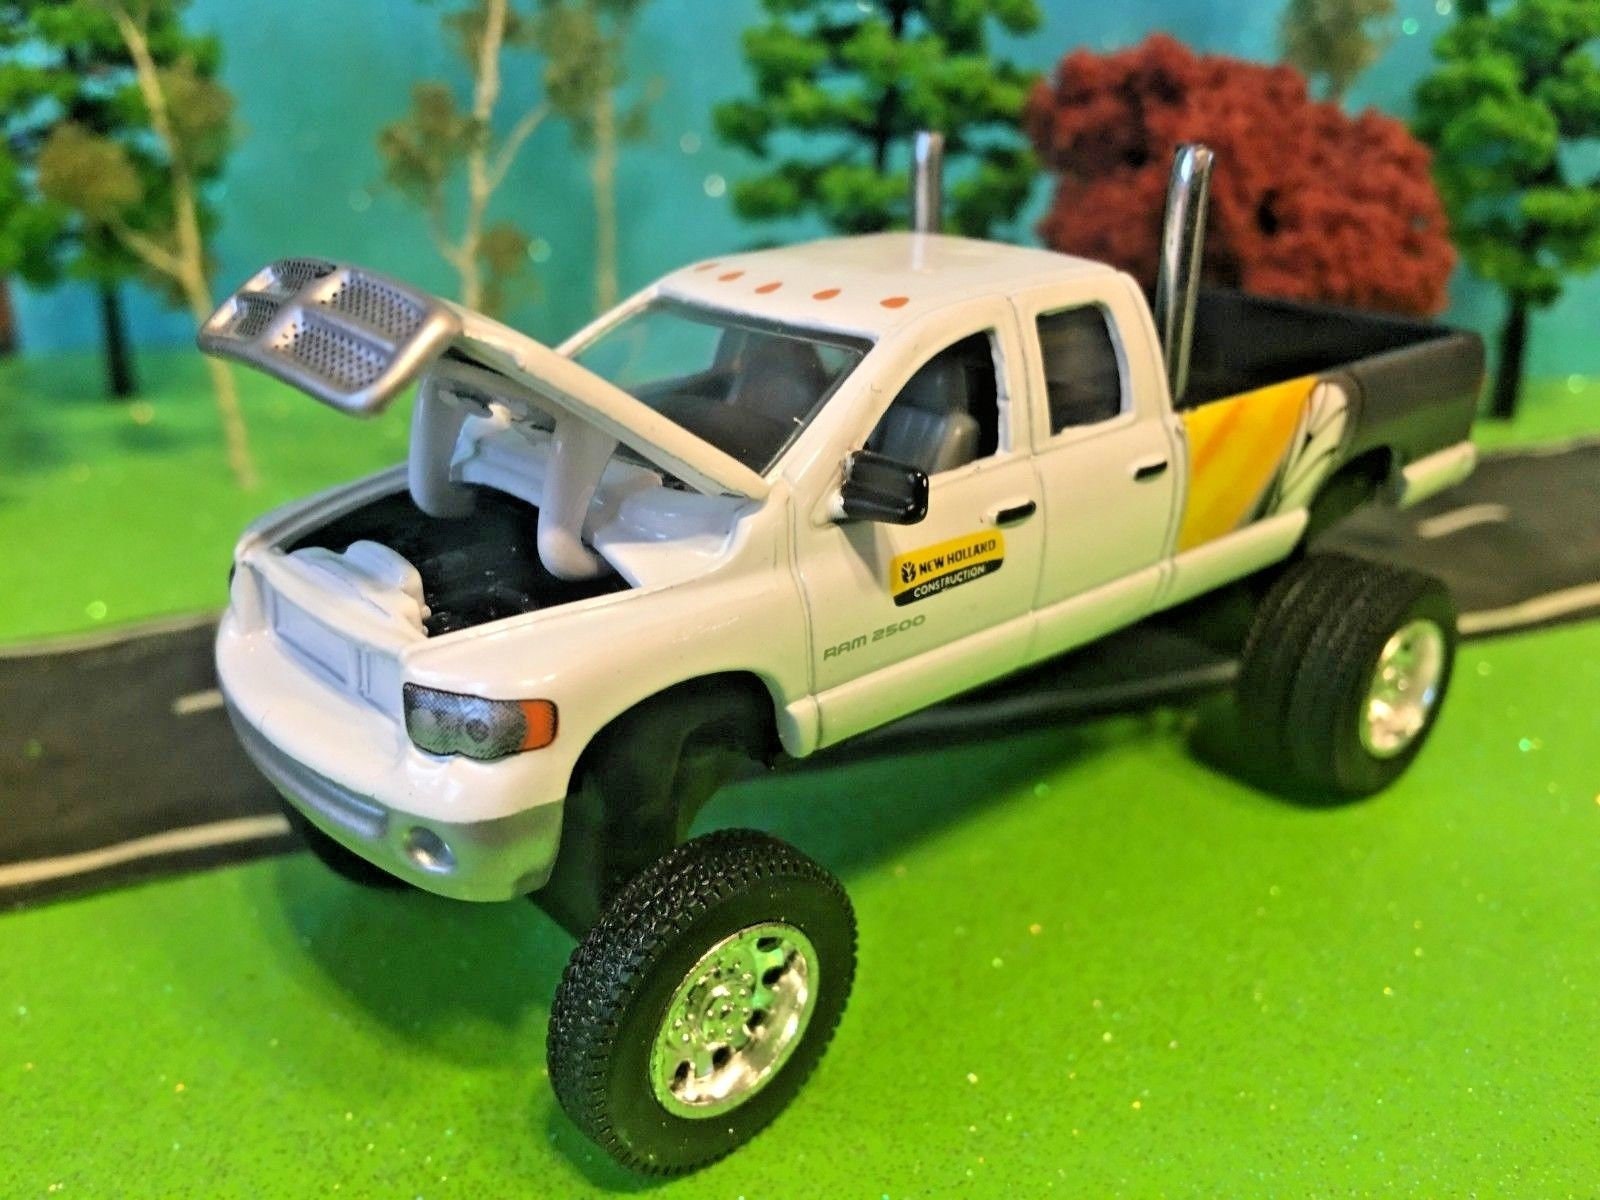 1/64 Custom Lifted Dodge Ram 2500, Ertl, New Holland, Agriculture, Farm Toy, Tricked Out